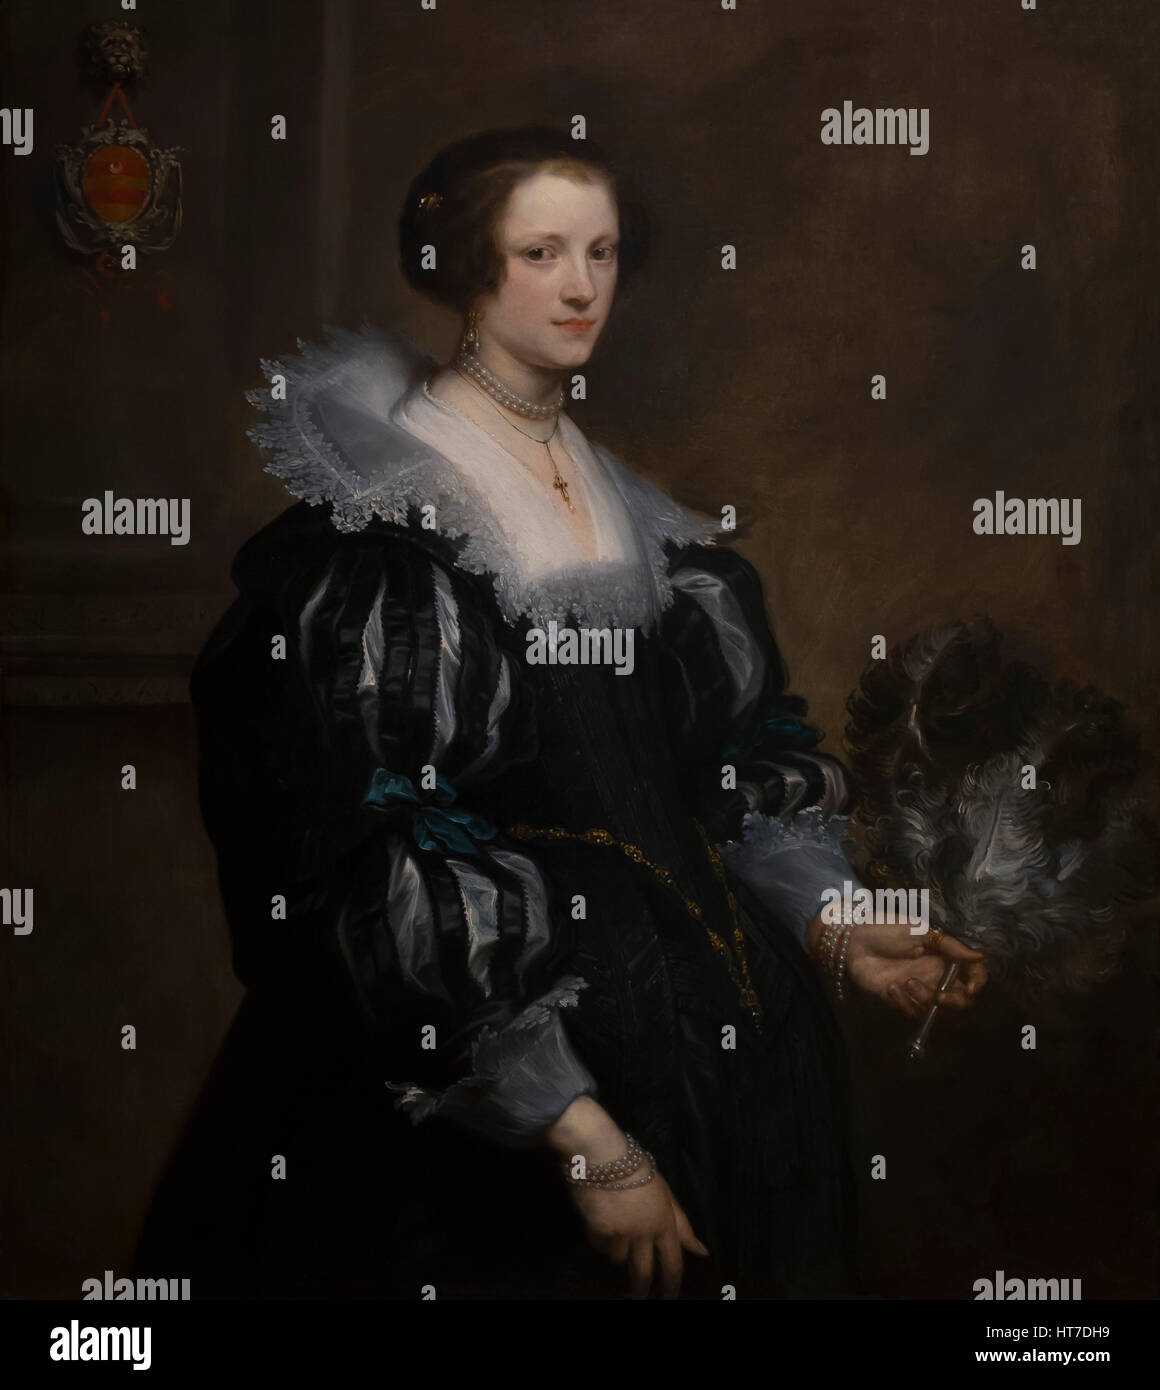 Portrait of Anna Wake, by Anthony van Dyck, 1628, Royal Art Gallery, Mauritshuis Museum, The Hague, Netherlands, Europe Stock Photo